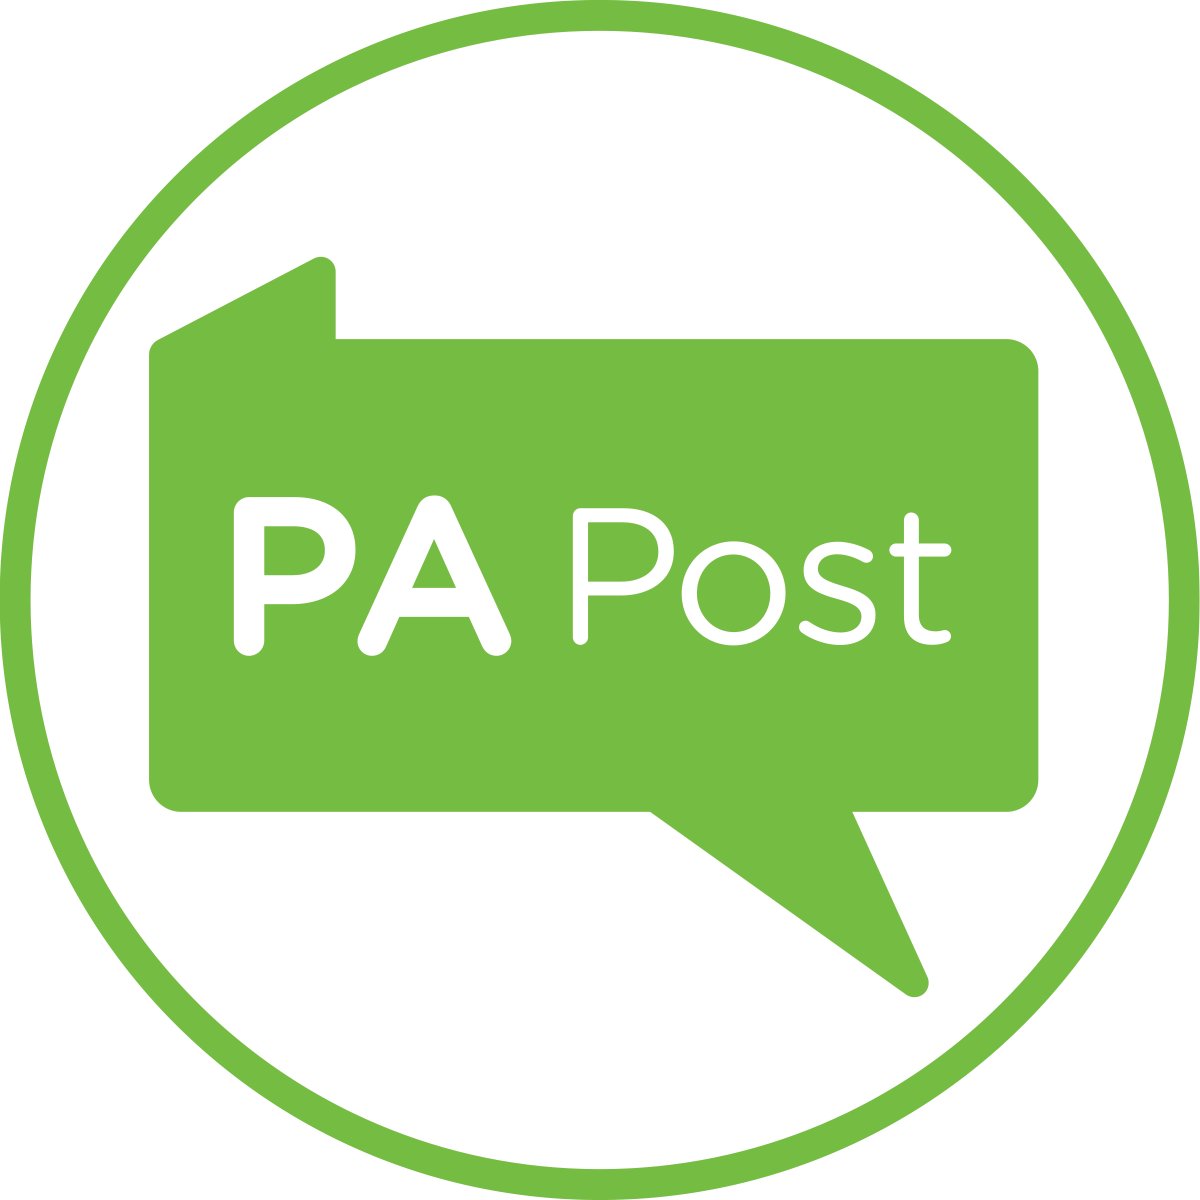 PA Post, a newsletter of @SpotlightPA, Pennsylvania's largest statewide news organization. Help us hold the powerful to account at https://t.co/7Xkc00ctxV.